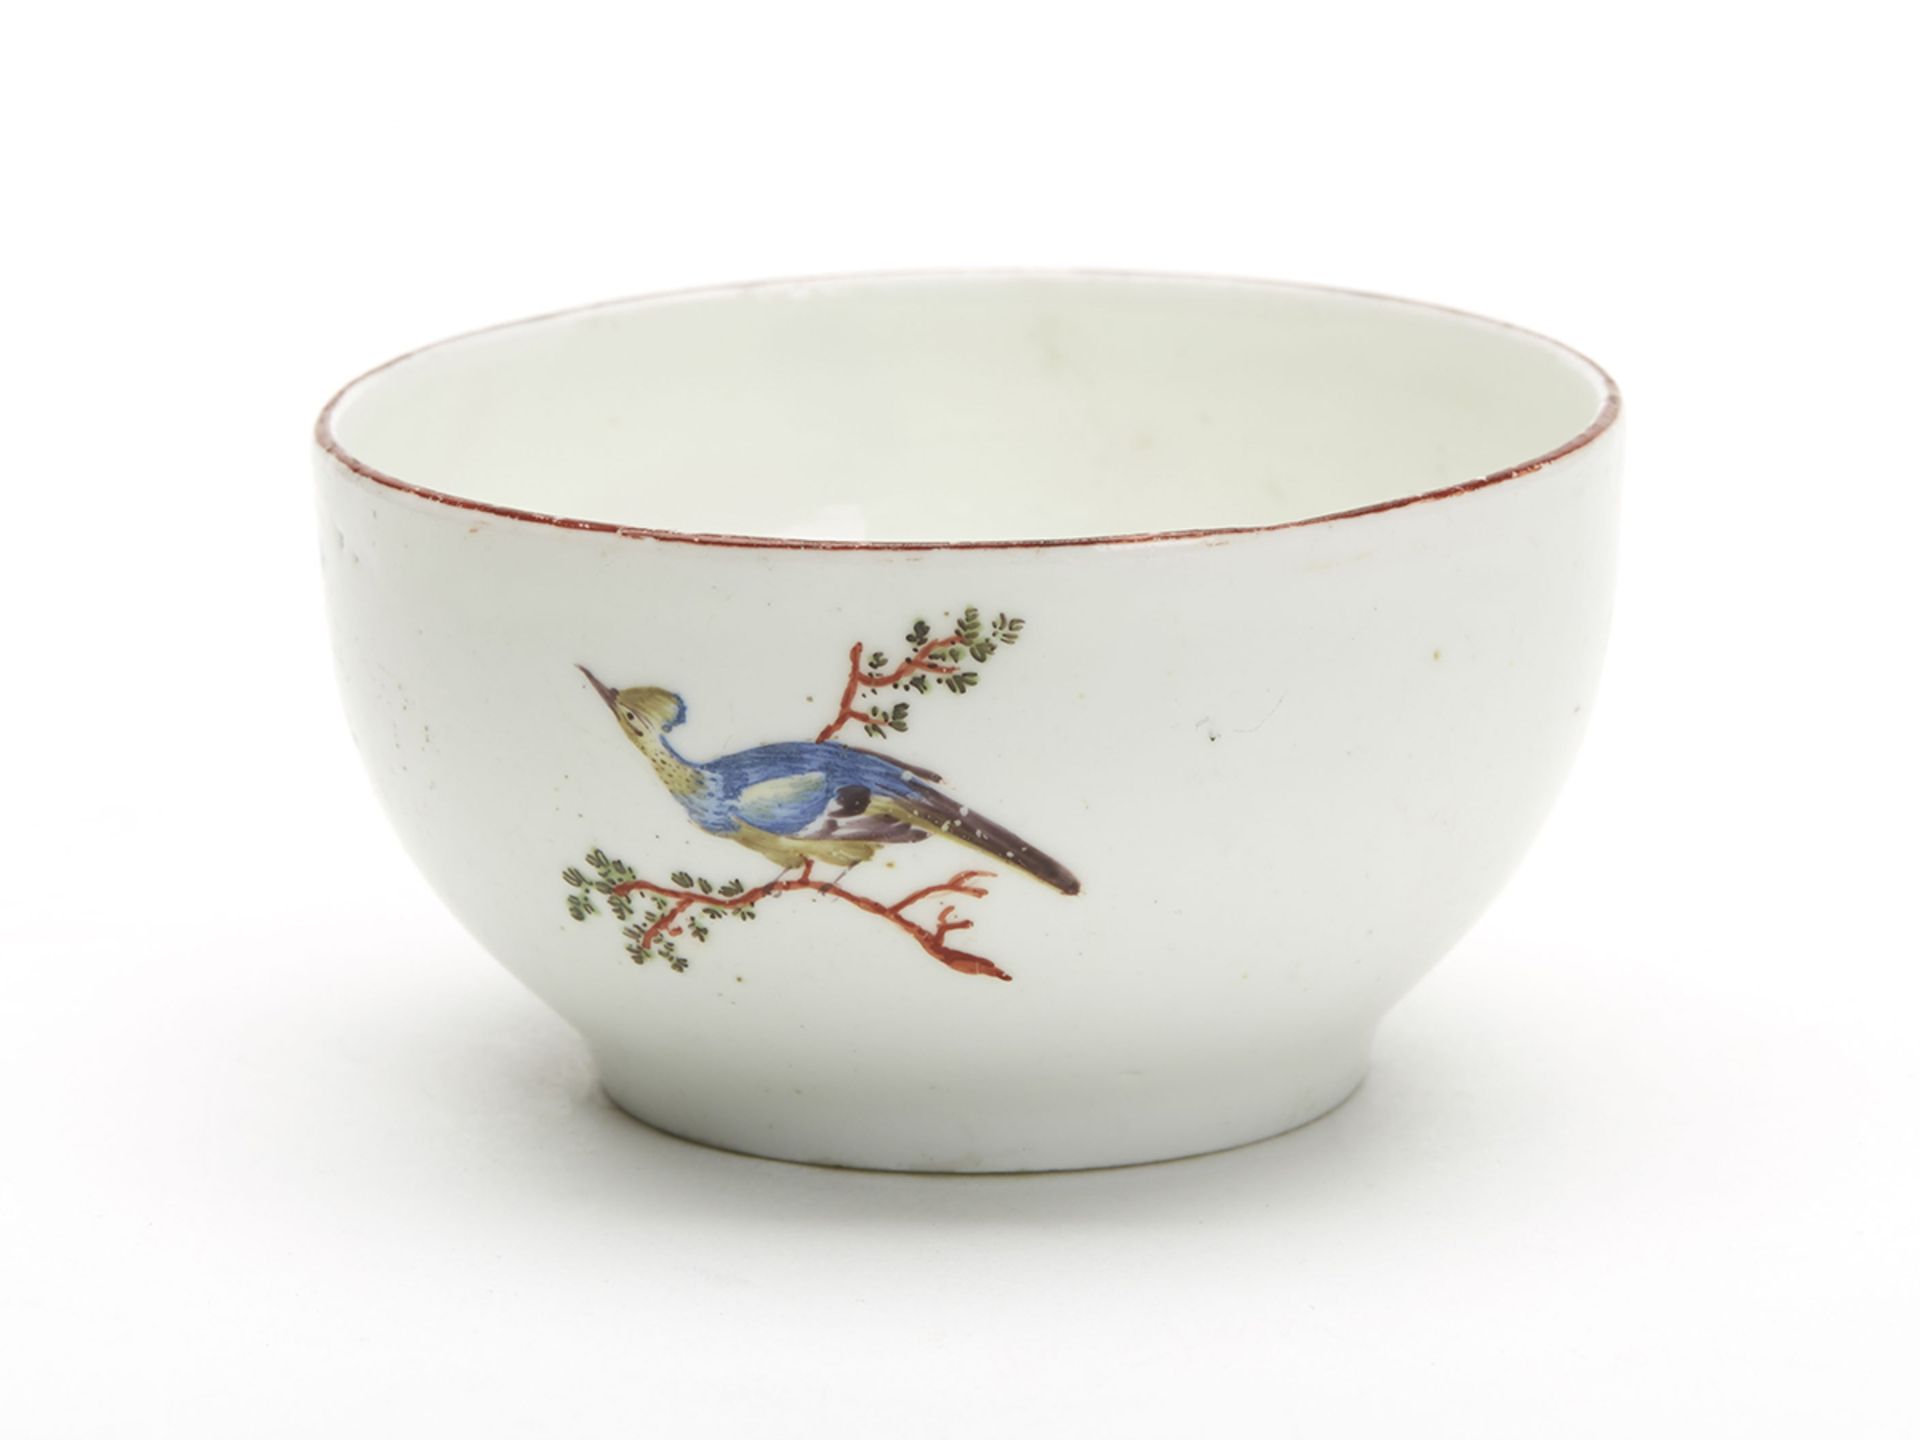 ANTIQUE EARLY CHELSEA BIRD PAINTED TEABOWL 18TH C. - Image 3 of 7